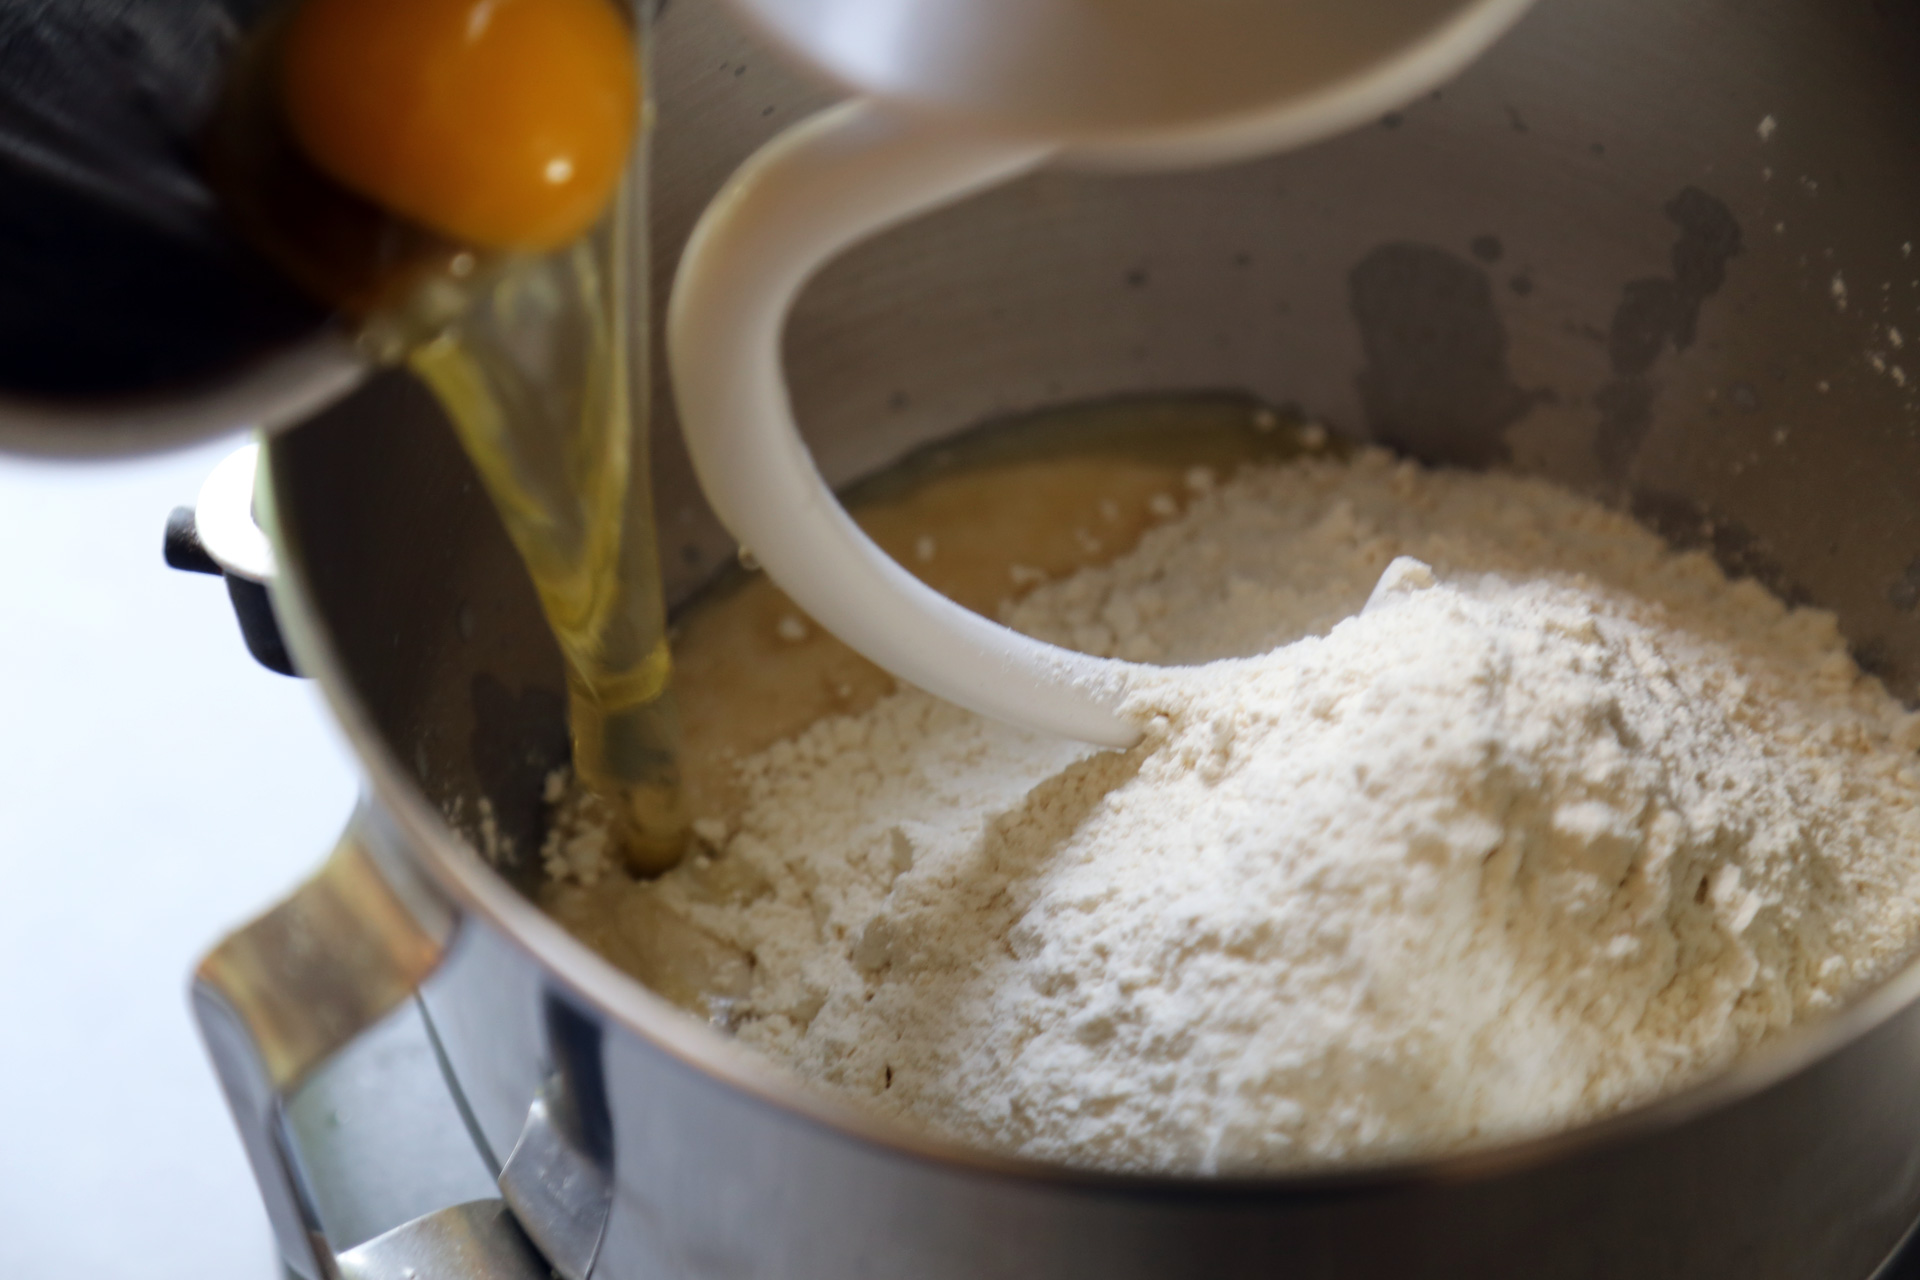 Fit the stand mixer with the dough hook, then add the 2 eggs, the flour, and the salt.